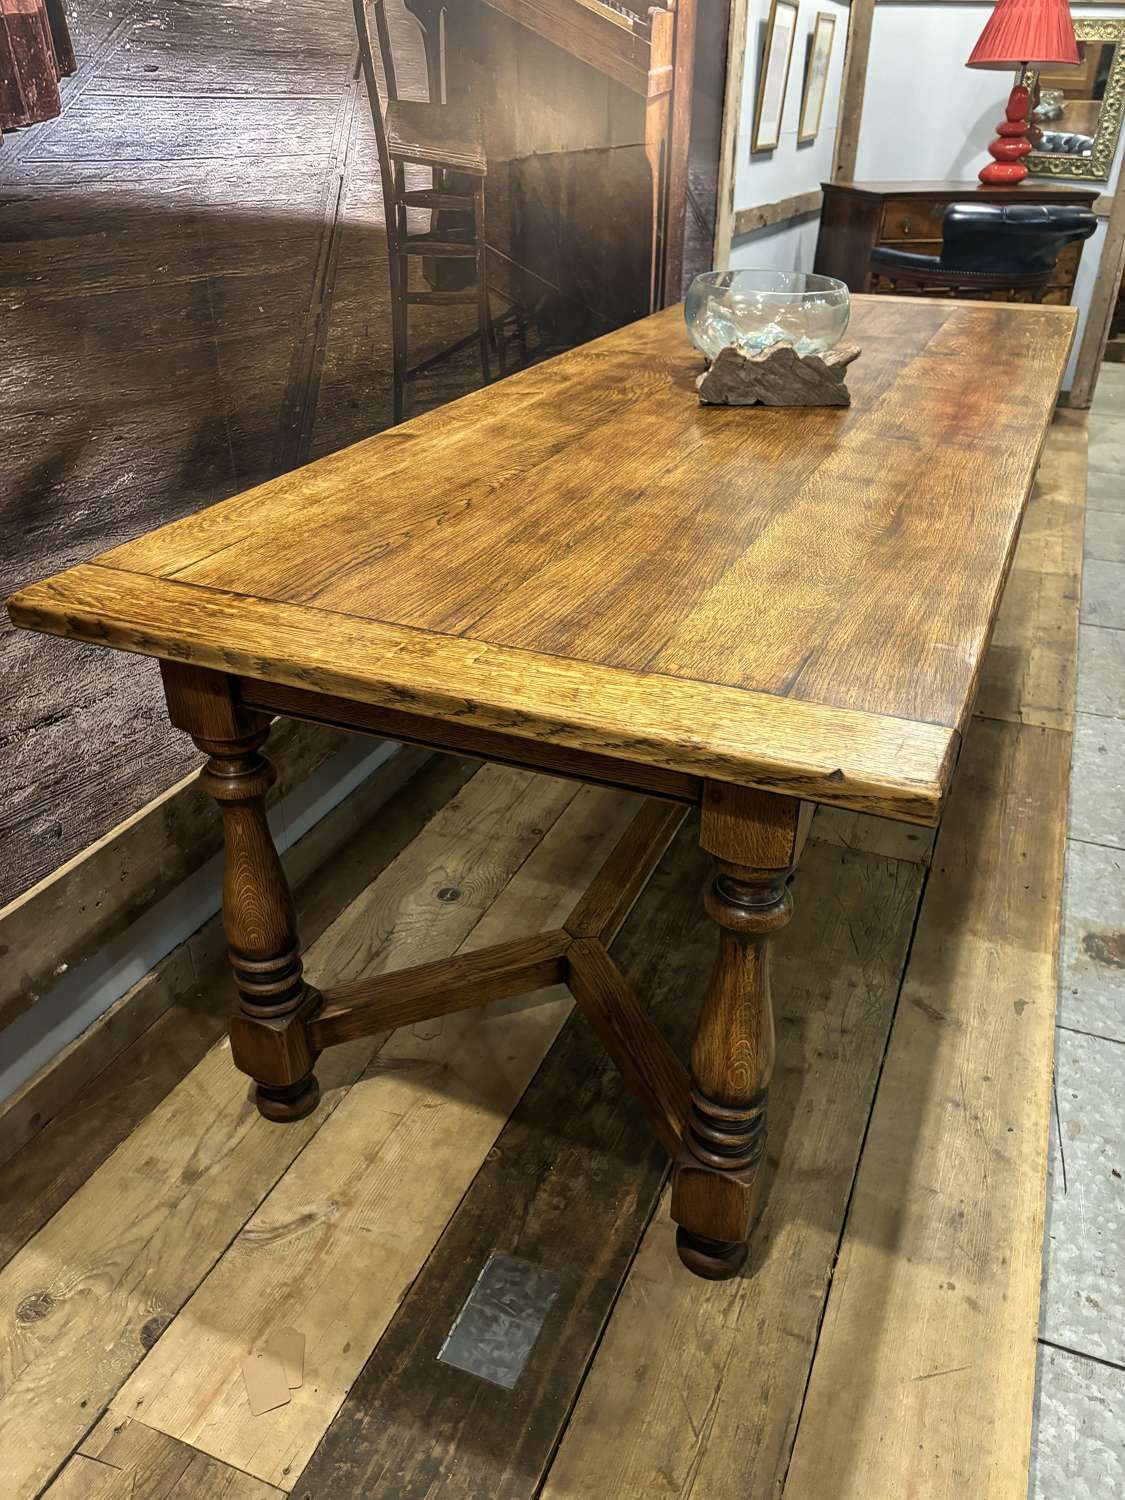 Solid Oak Refectory Dining table. Seats up to 10